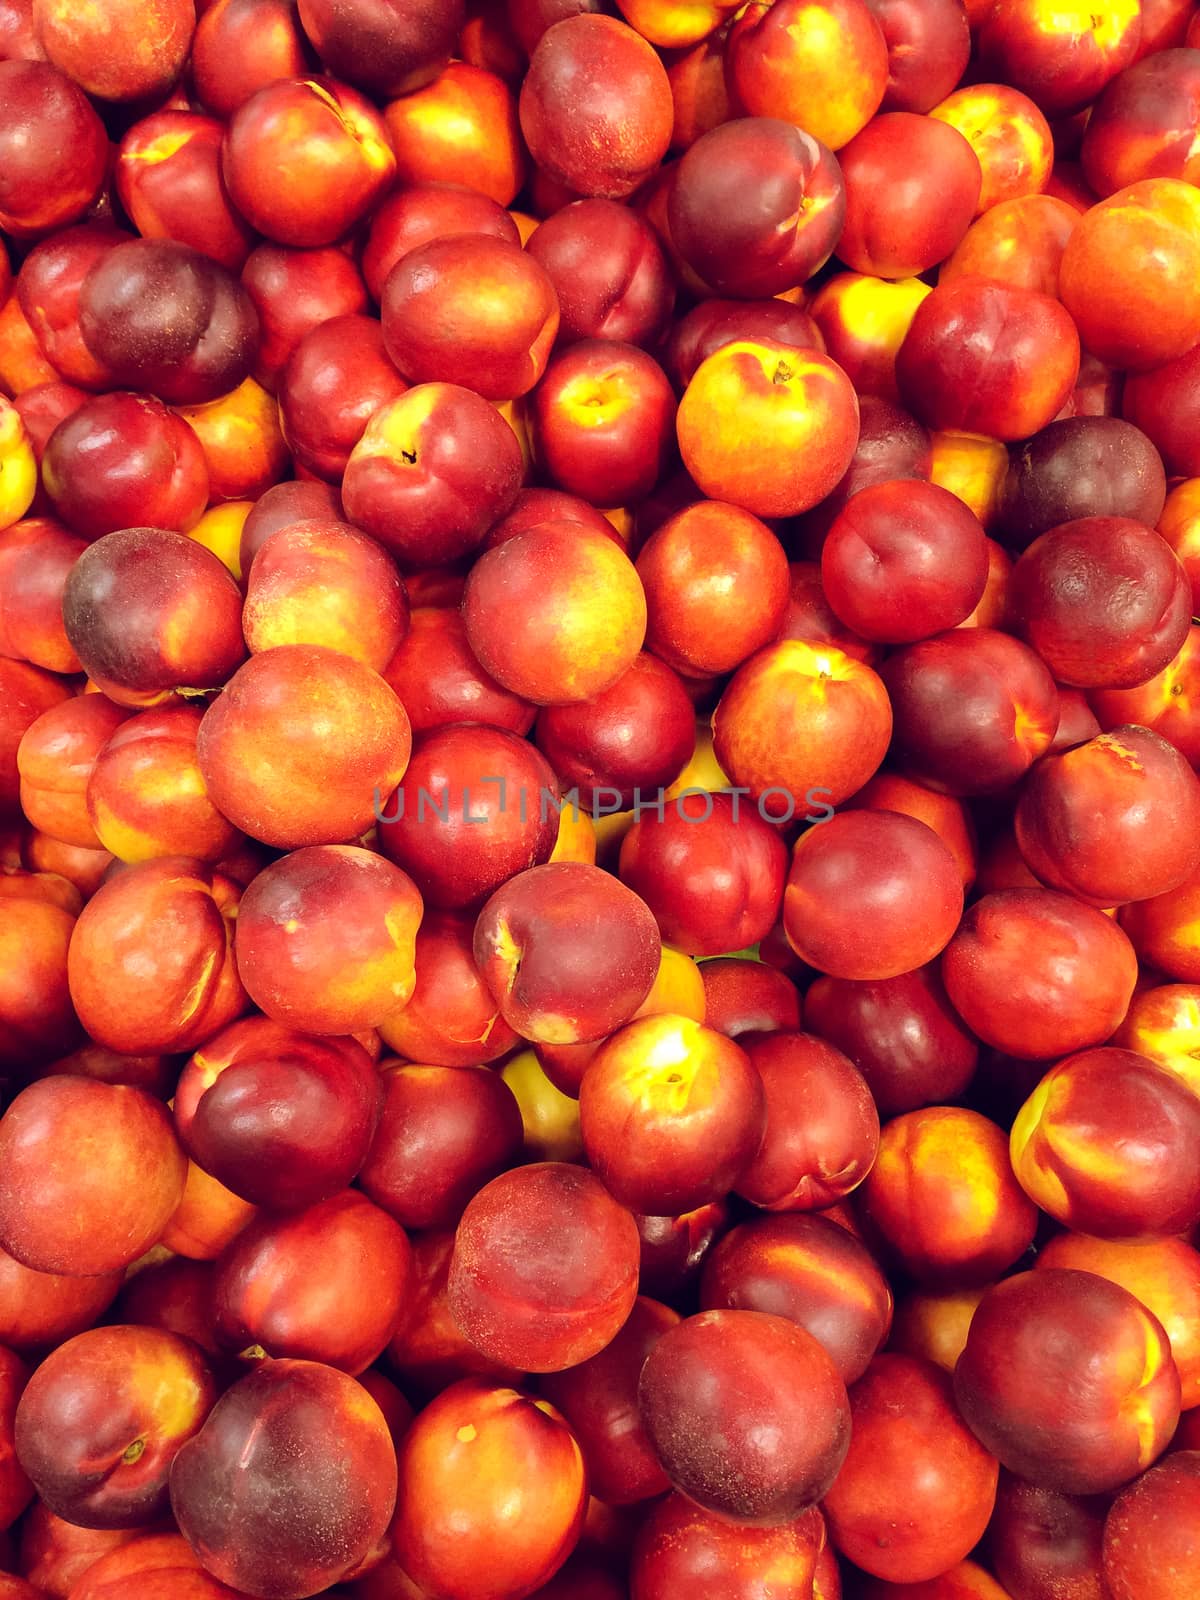 Sweet red peaches at the market. Fruit background.